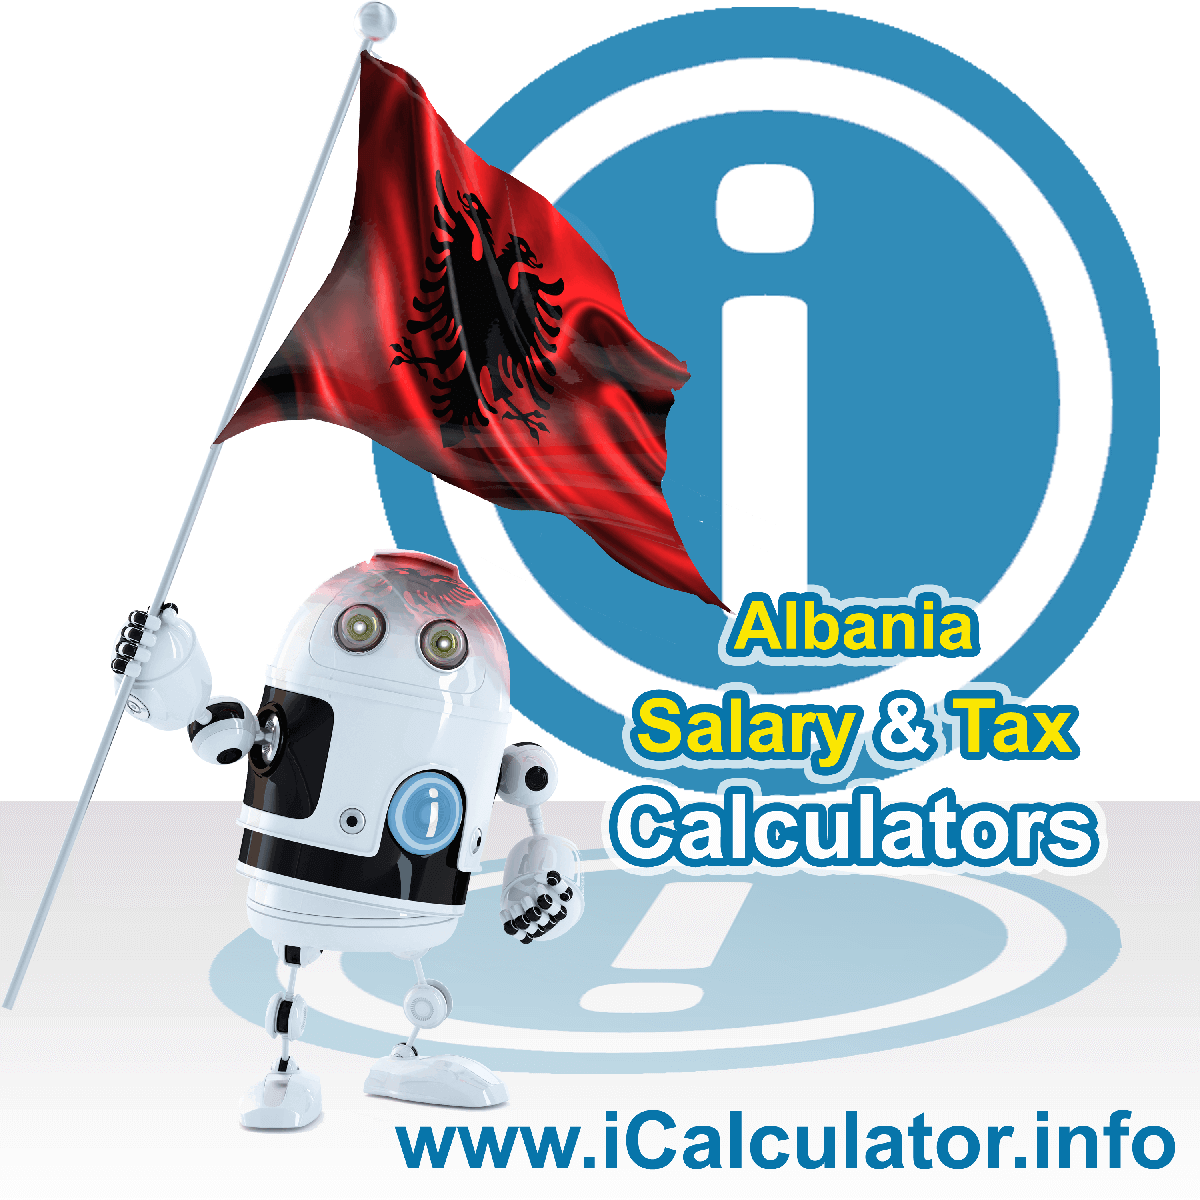 Albania Tax Calculator. This image shows the Albania flag and information relating to the tax formula for the Albania Salary Calculator